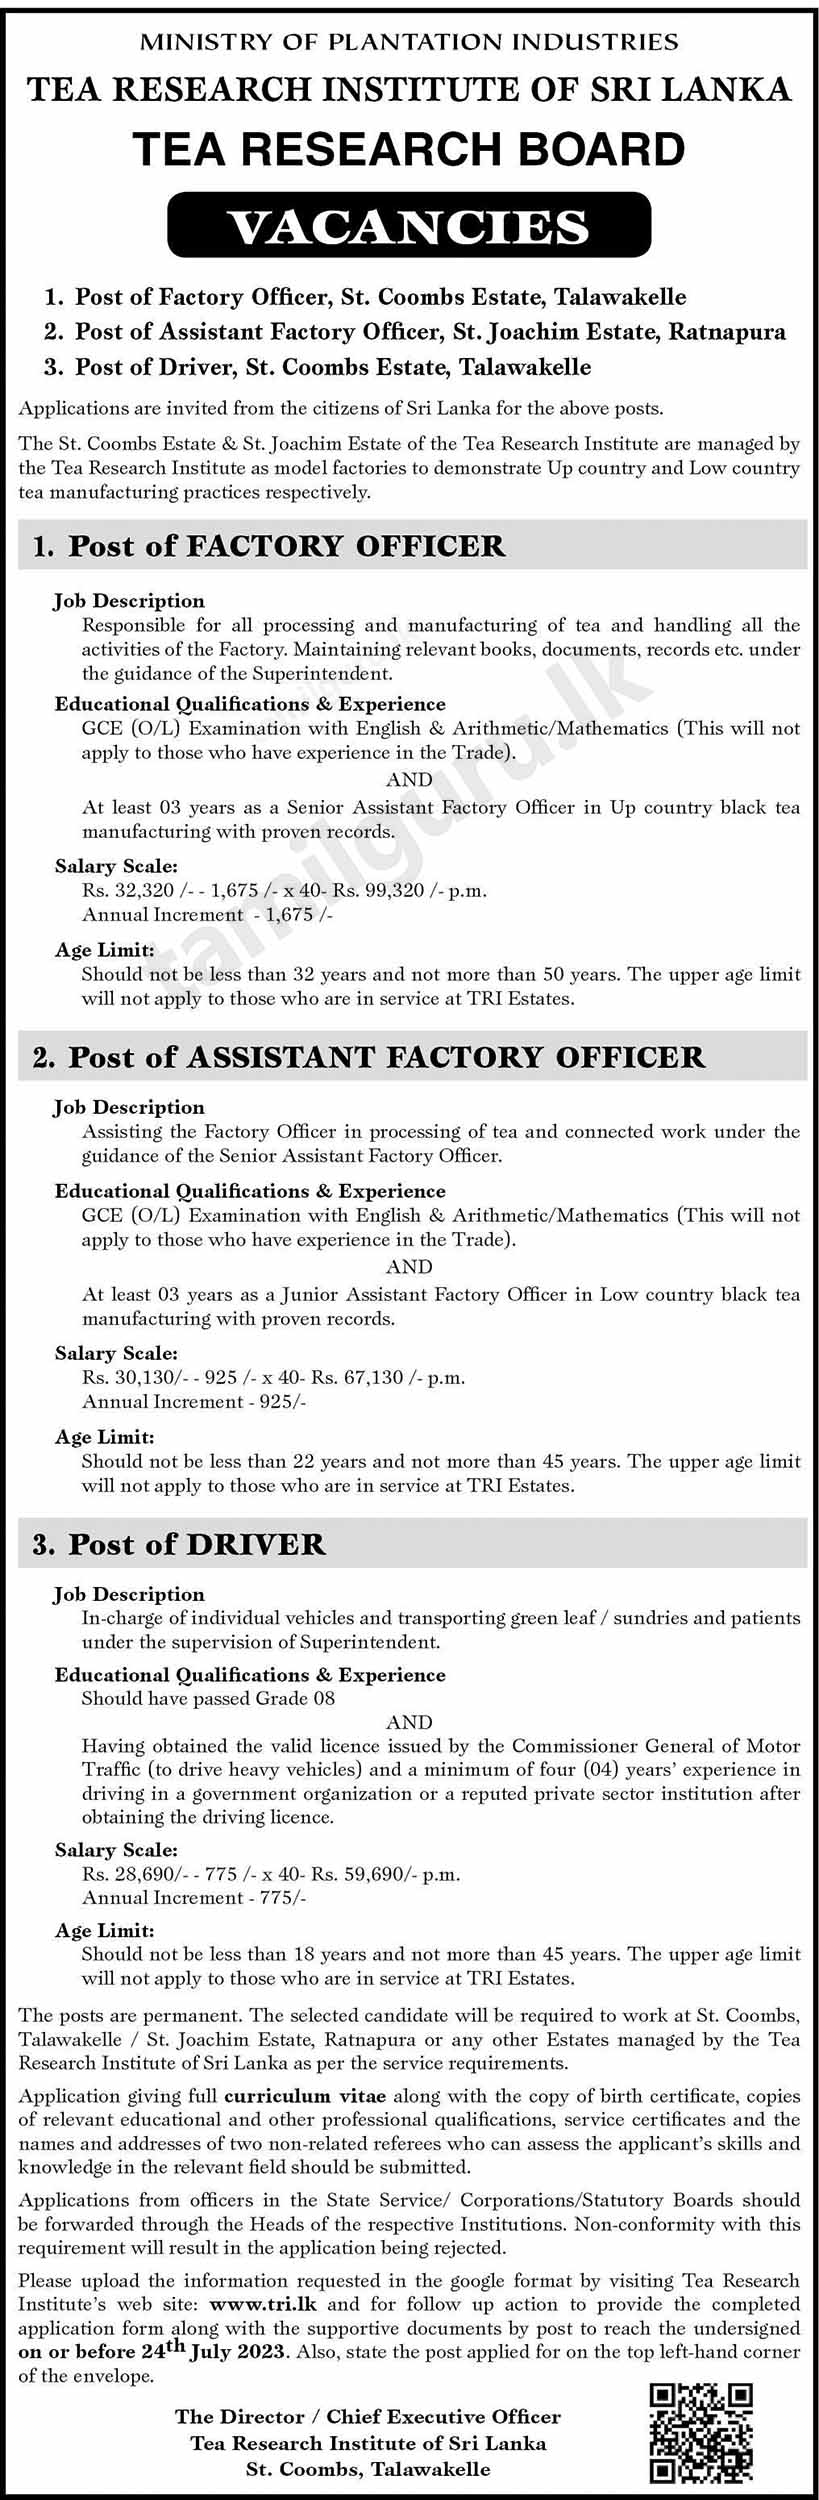 Tea Research Institute Vacancies 2023 July - Factory Officer, Assistant Factory Officer, Driver